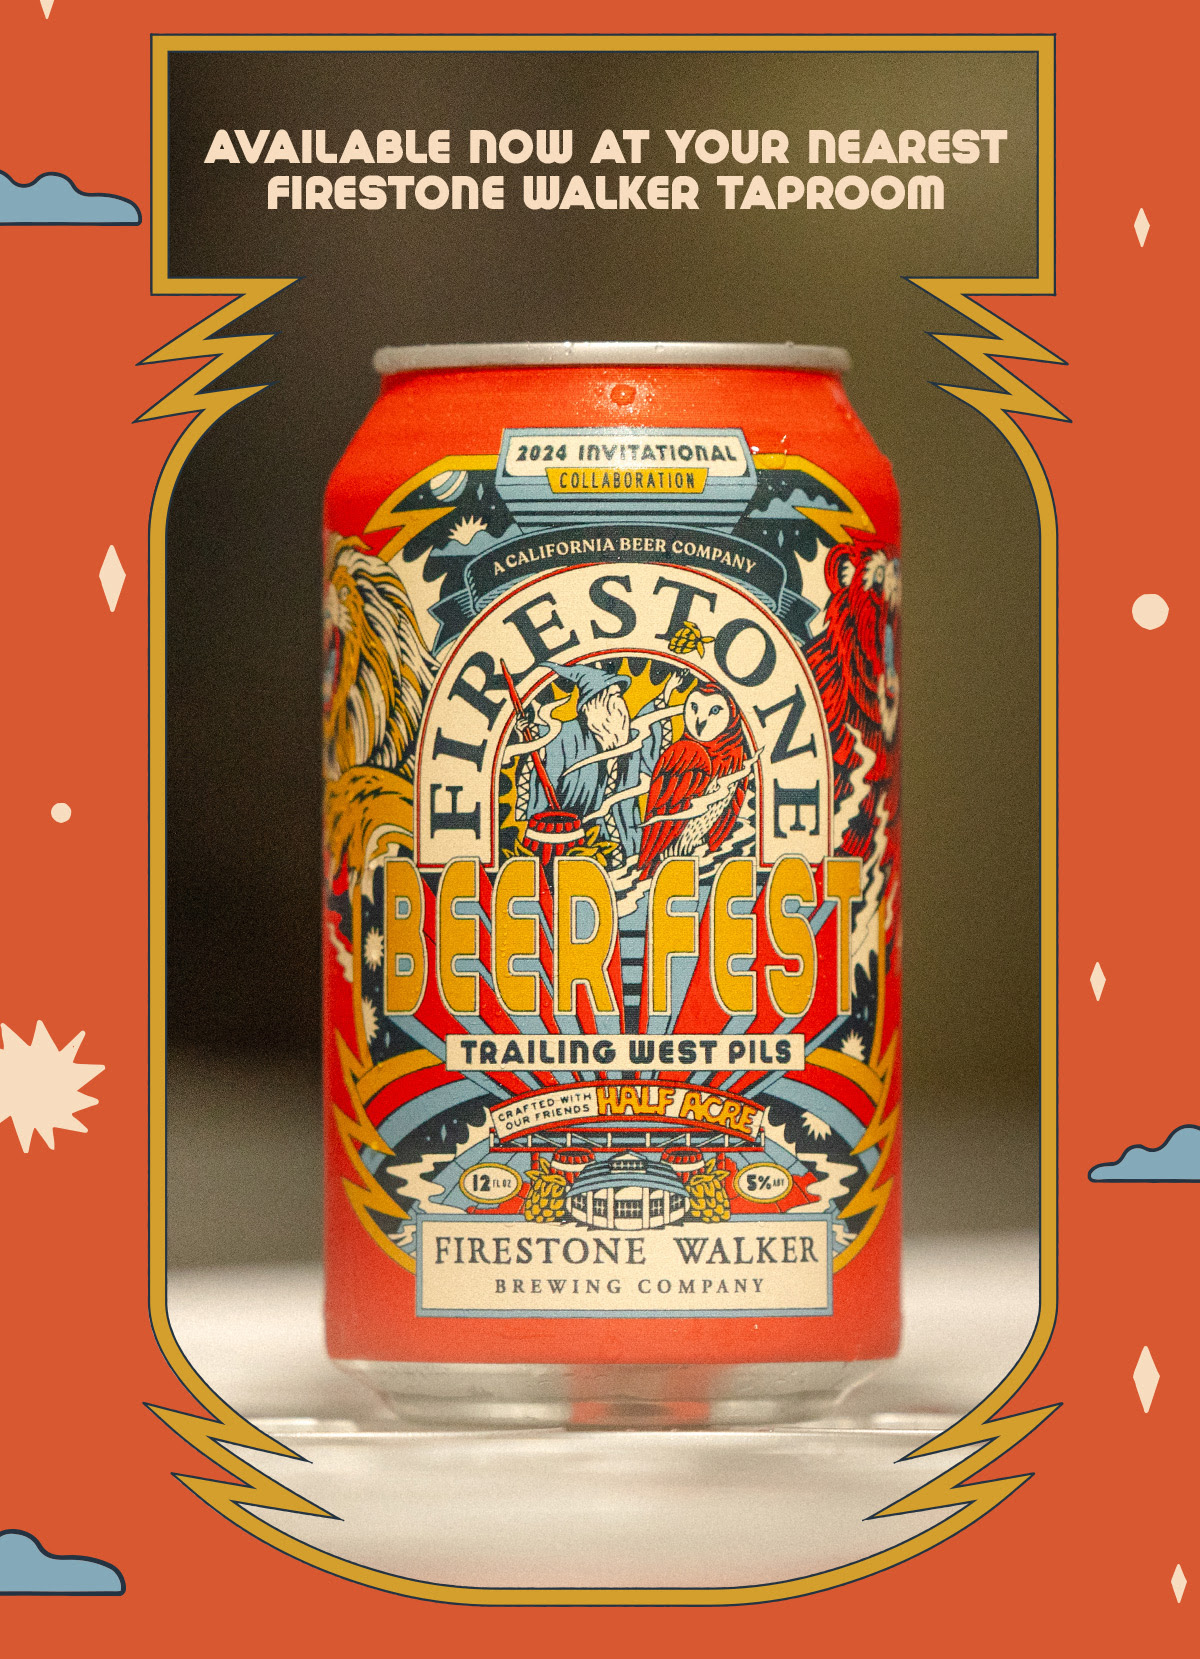 Image also shows Firestone Walker’s Beer Fest Collaboration beer, Trailing West Pils. The text reads, “Available now at your nearest Firestone Walker Taproom.” Click here to learn more.